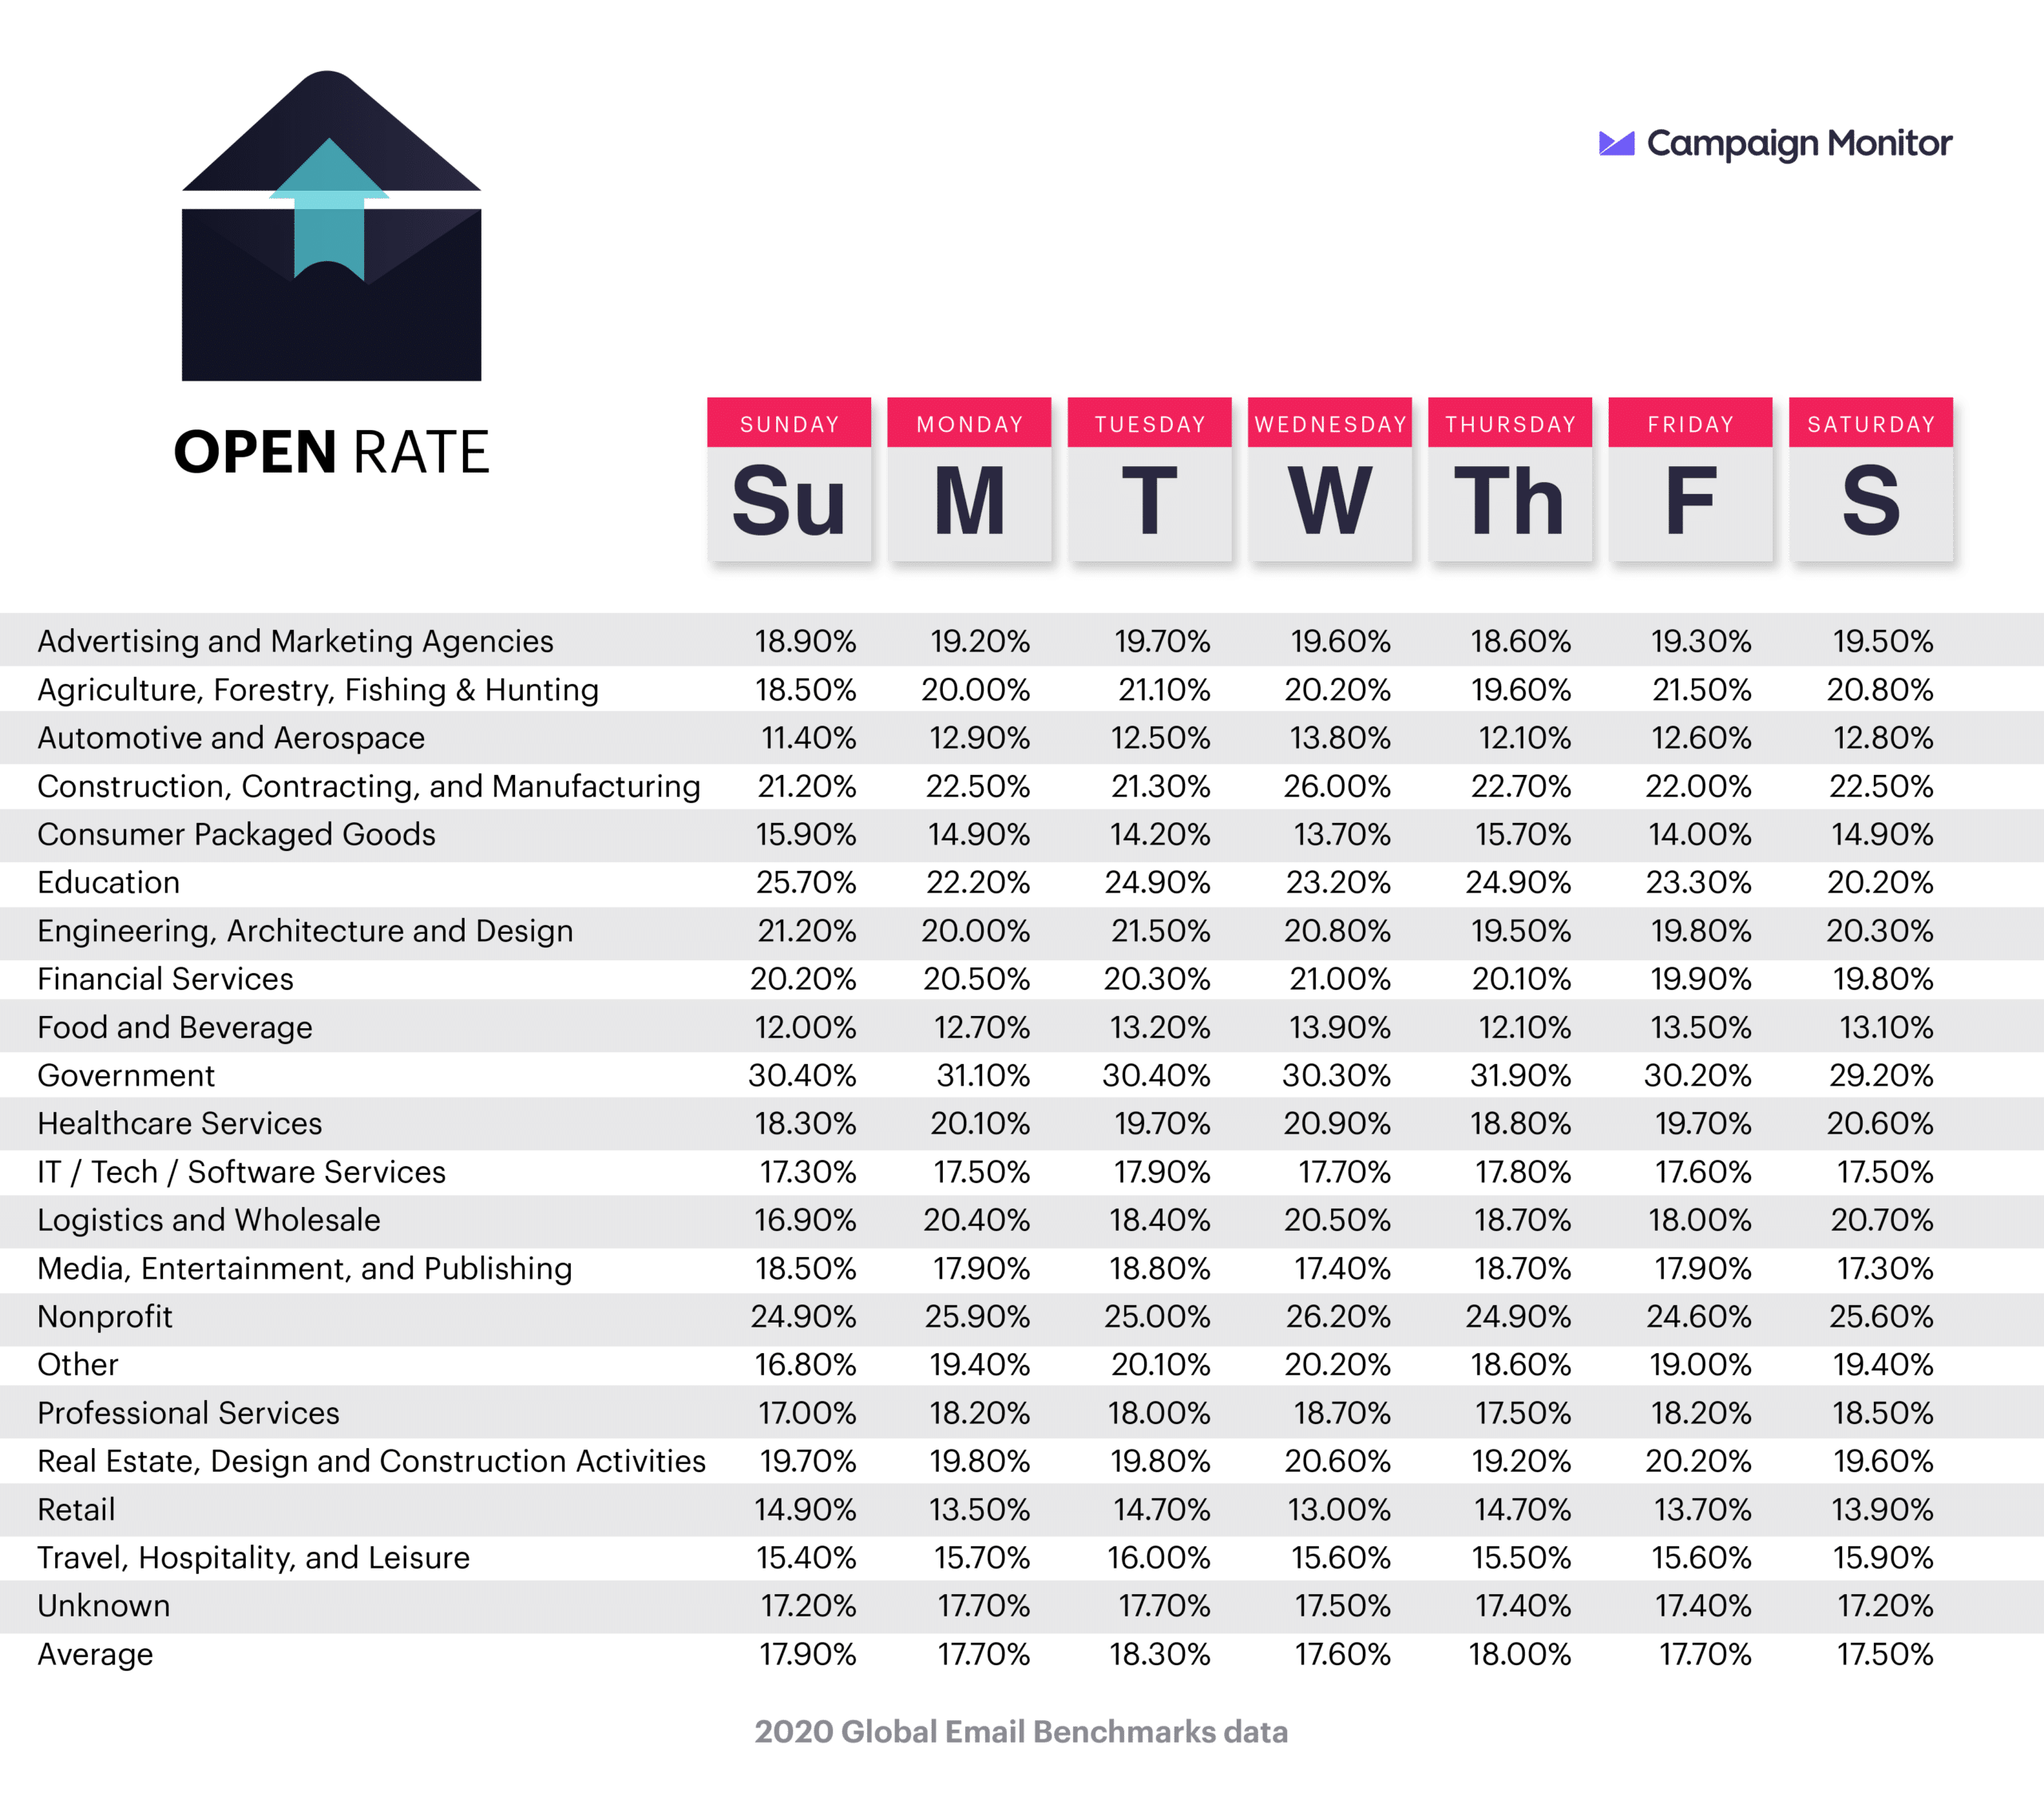 Average Industry Open Rates in 2019